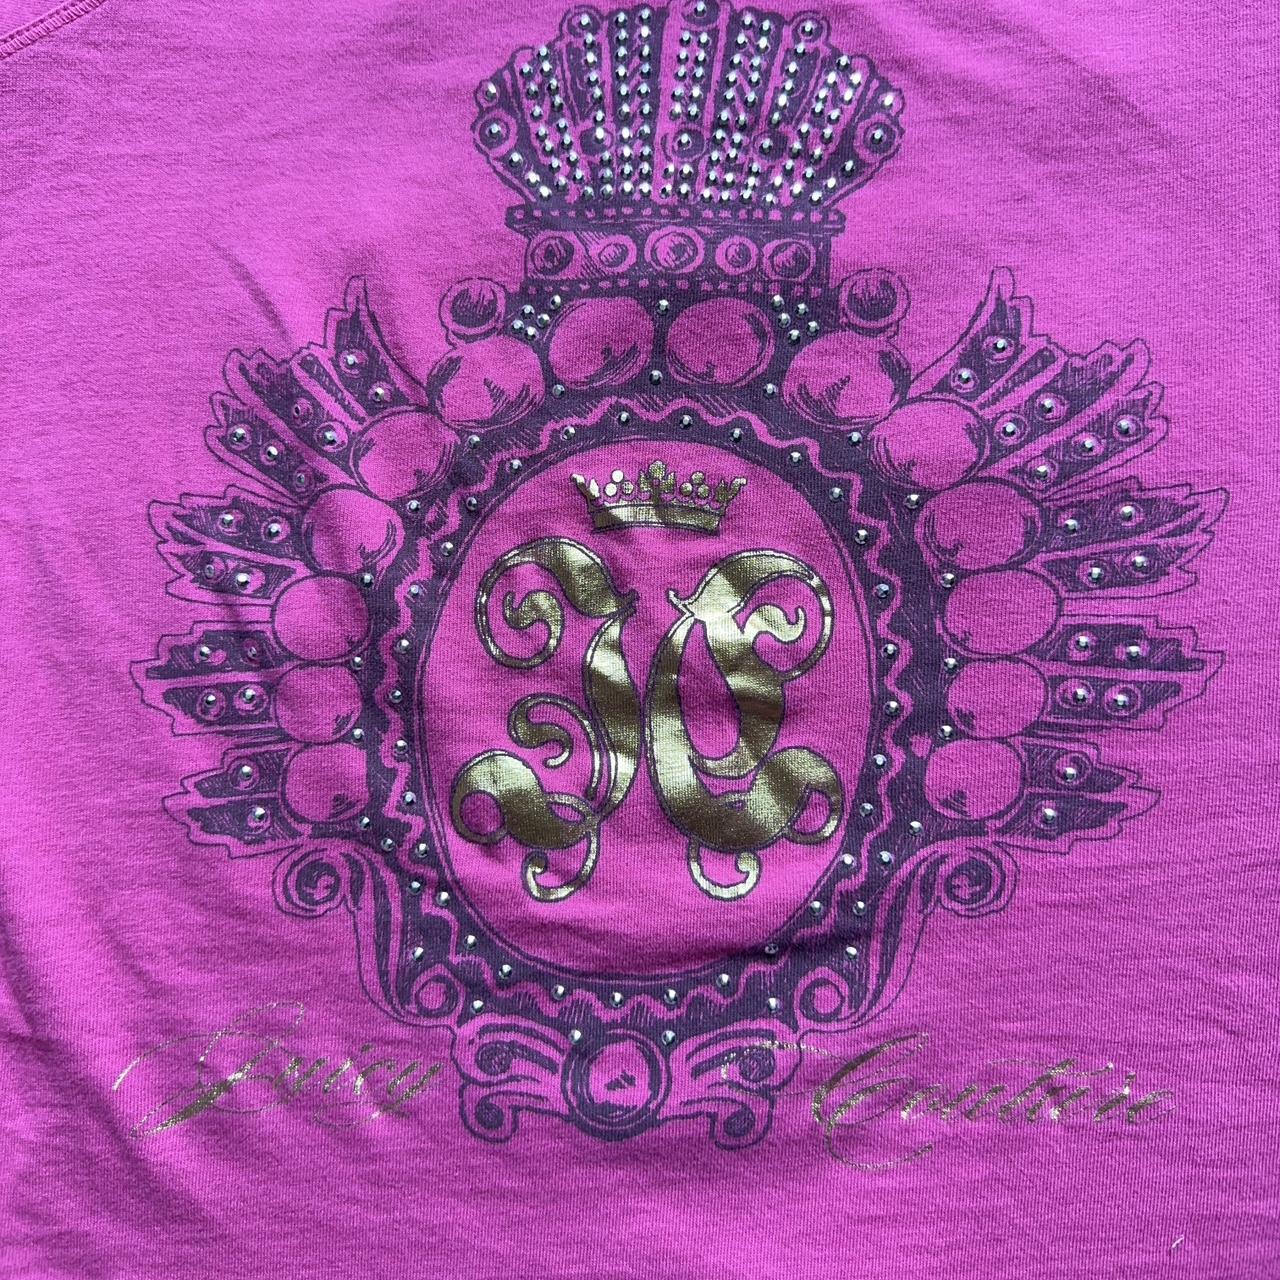 Hot pink juicy couture baby tee Super stretchy and... - Depop